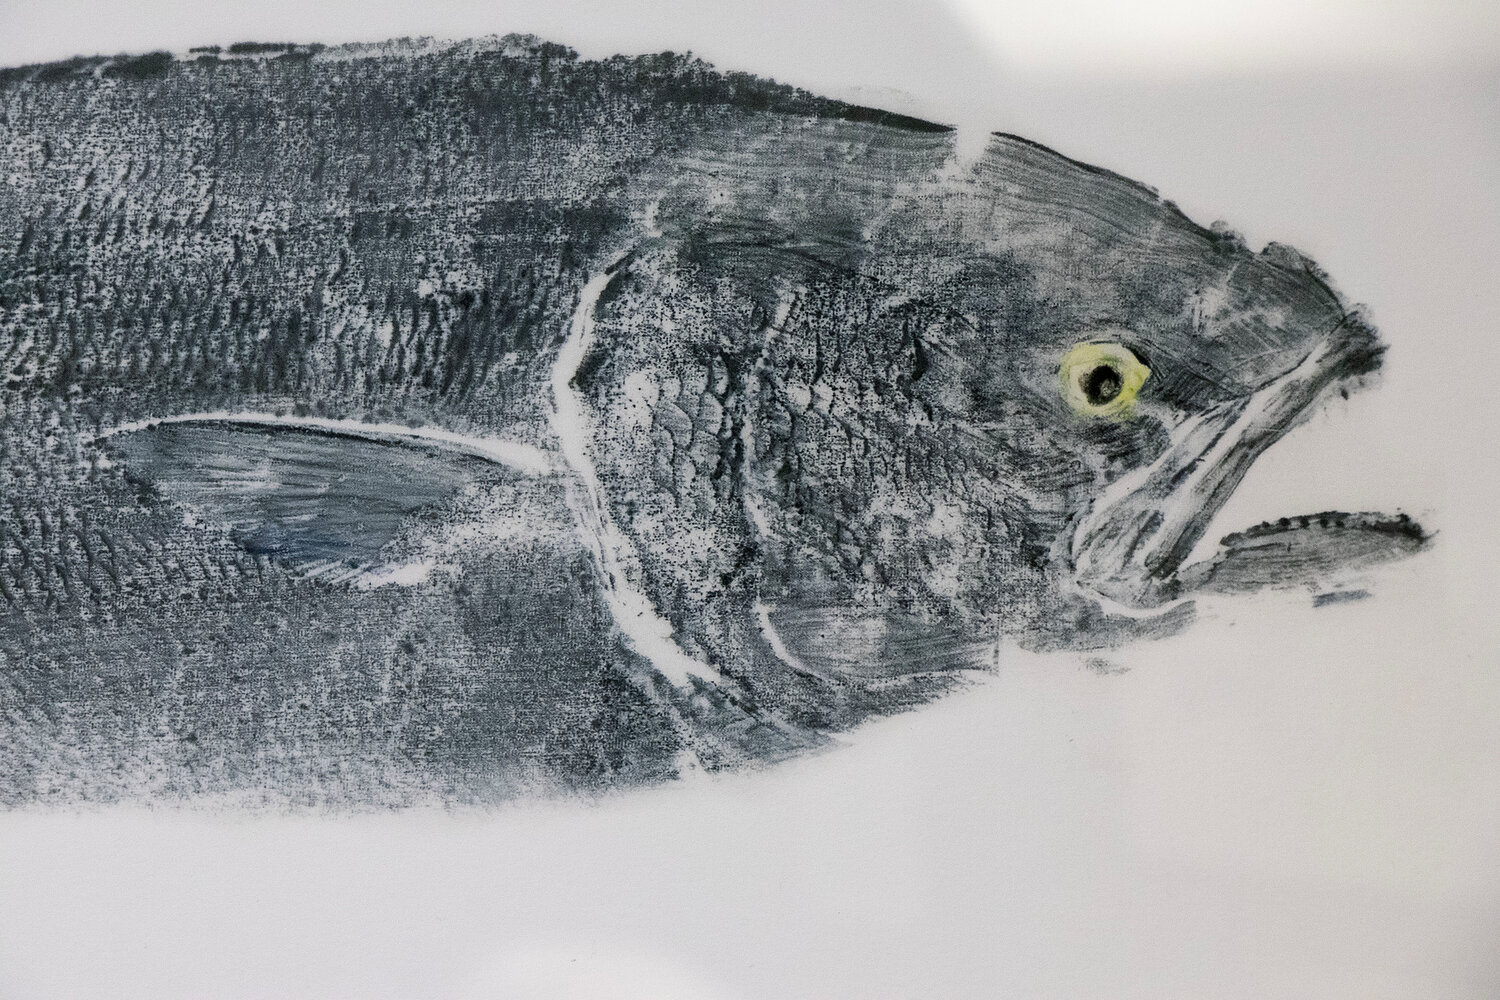 Tony Chatowsky’s print of a locally caught bluefish, his favorite fish along with striped bass.